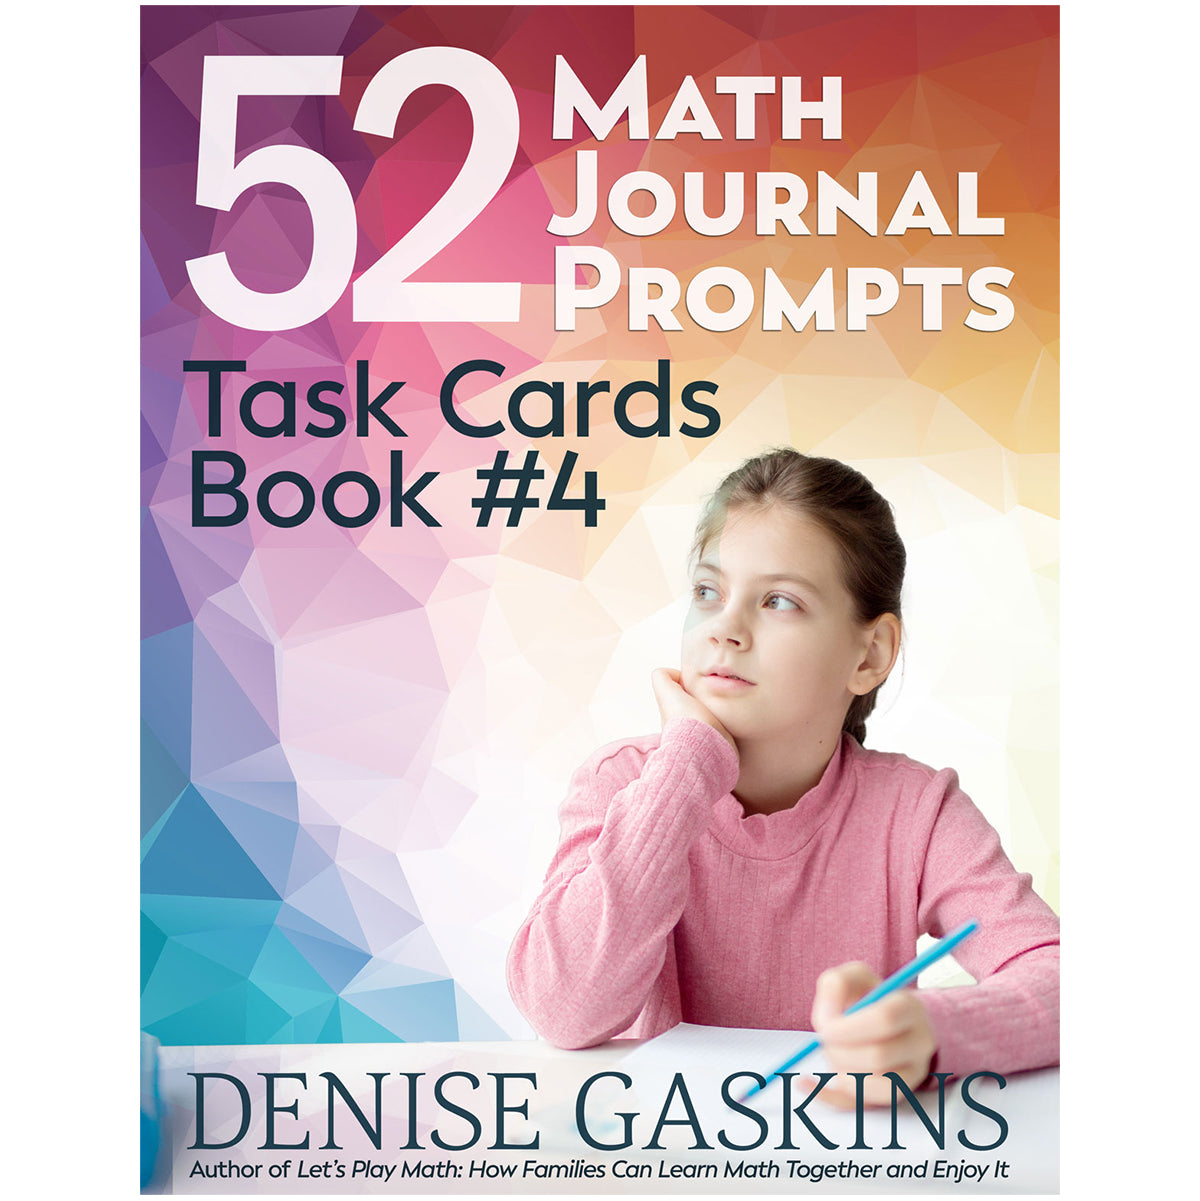 Math Journal Prompts book four printable math activity book by Denise Gaskins